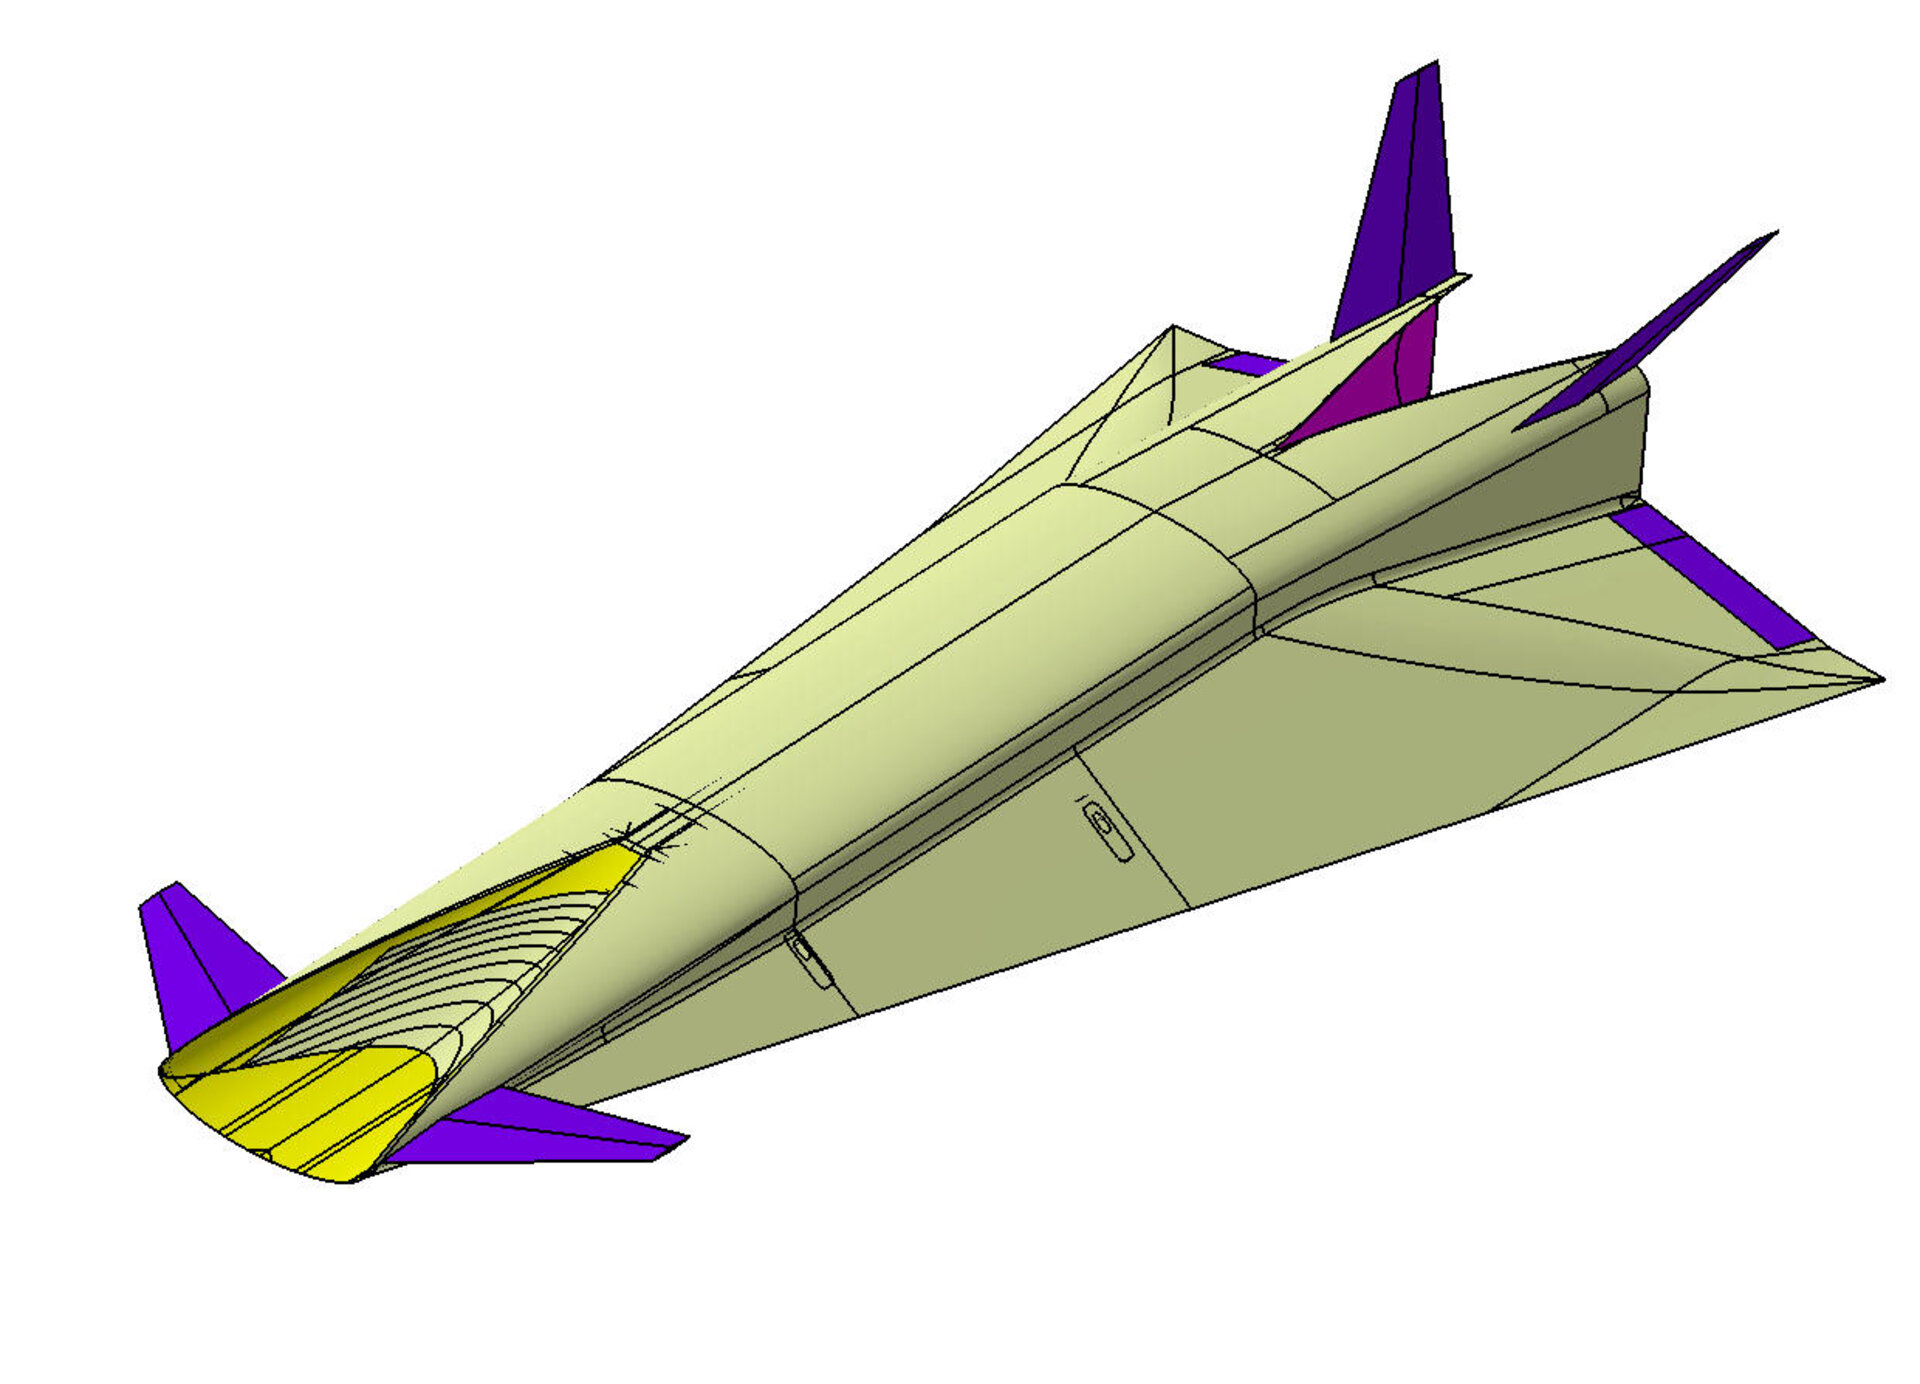 Fig 1: Completely integrated vehicle concept for Mach 8 flight